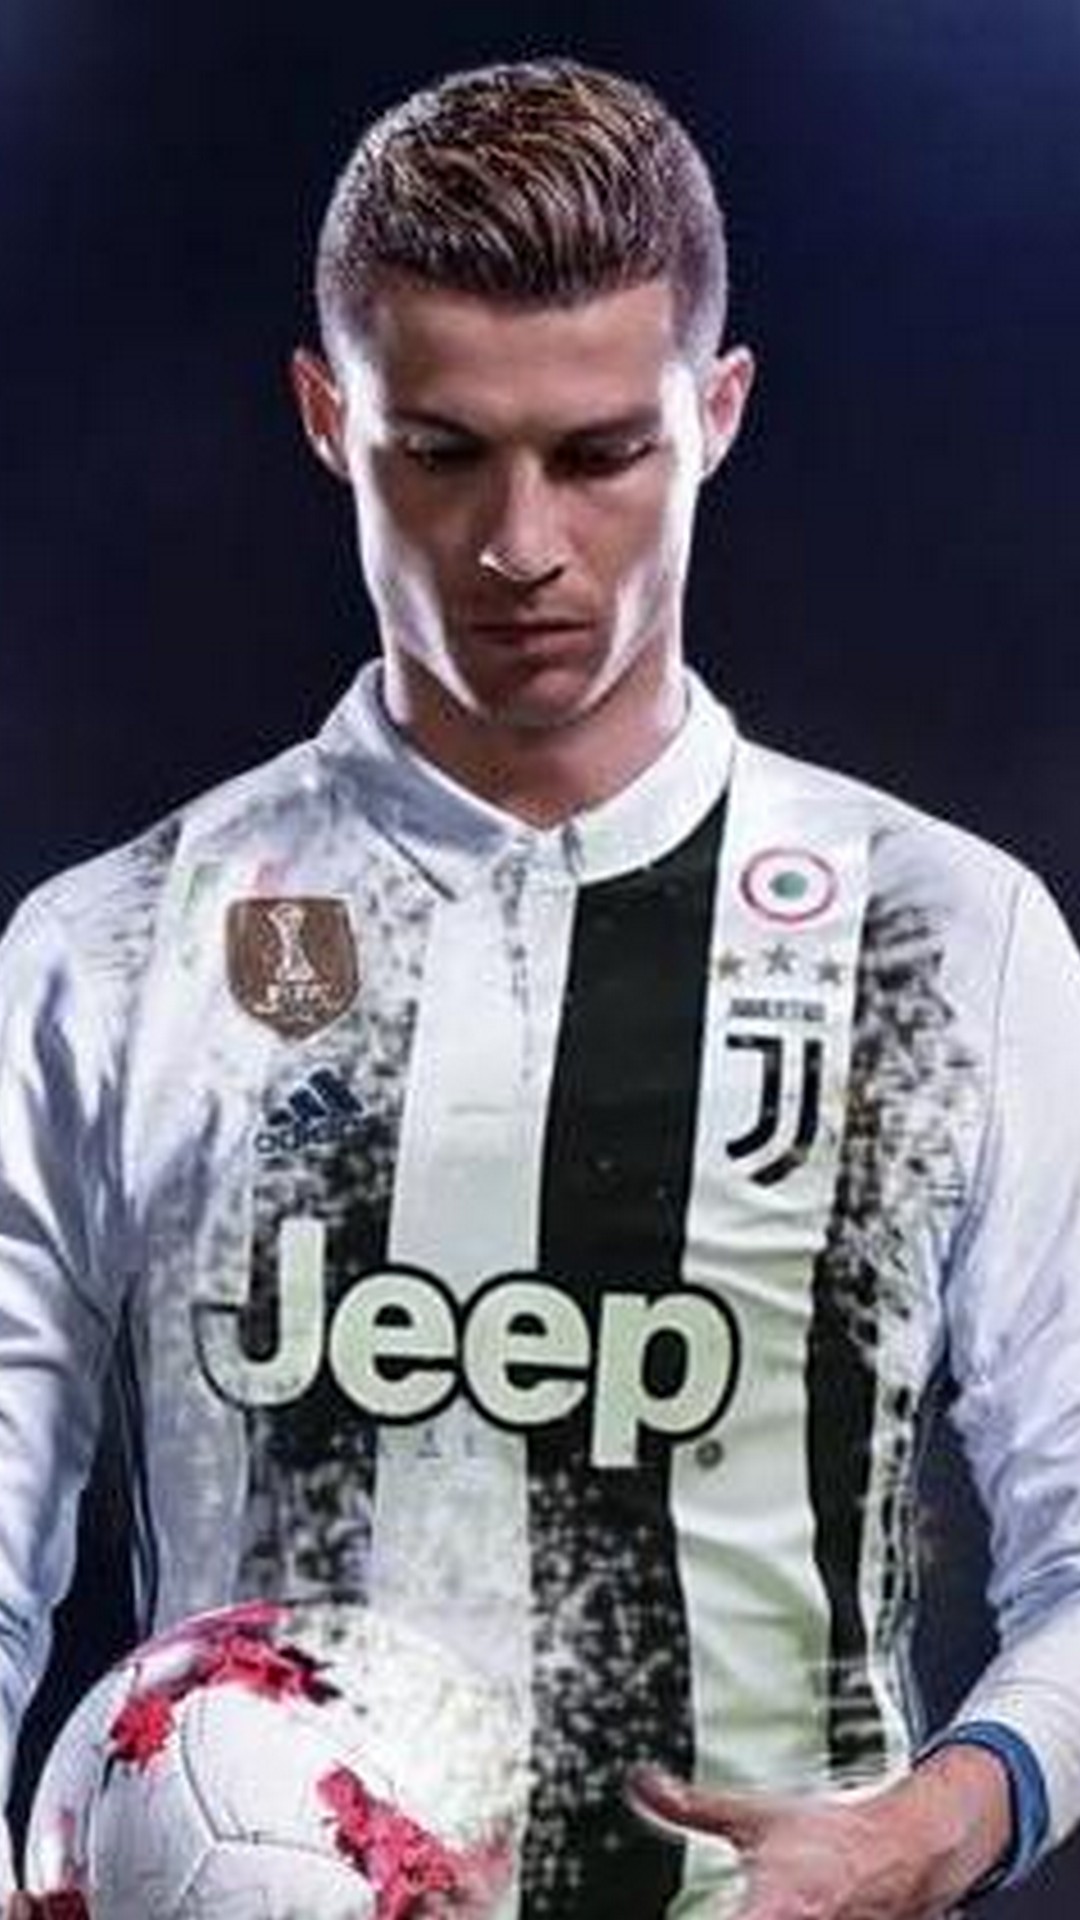 Android Wallpaper Cristiano Ronaldo Juventus with image resolution 1080x1920 pixel. You can make this wallpaper for your Android backgrounds, Tablet, Smartphones Screensavers and Mobile Phone Lock Screen